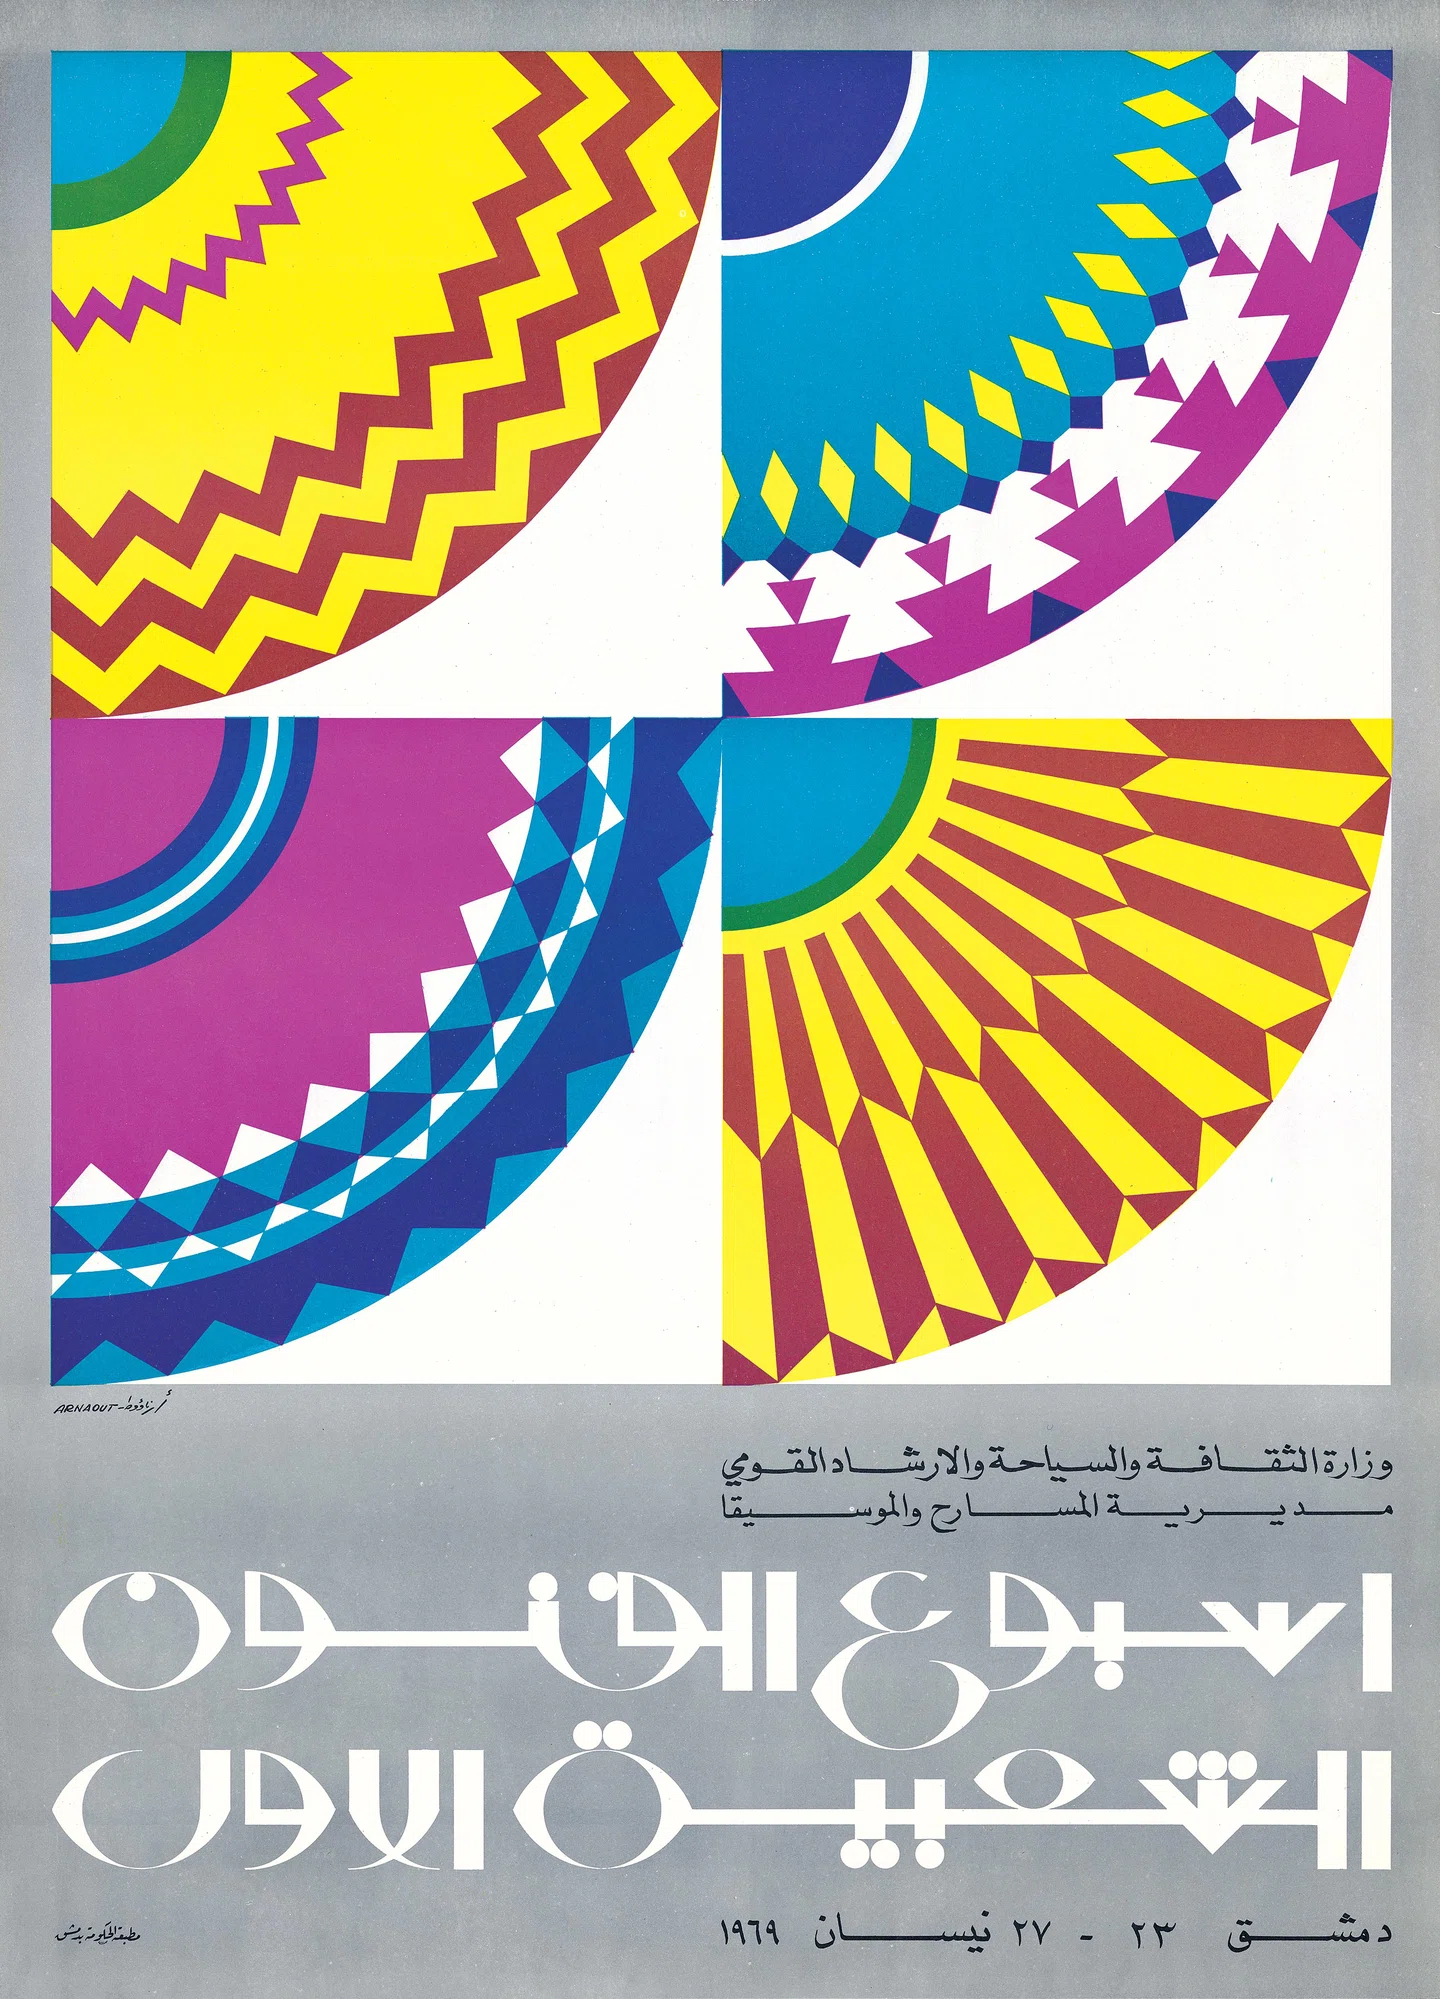 syrian-print-archive-features-graphic-design-itsnicethat-13.jpg